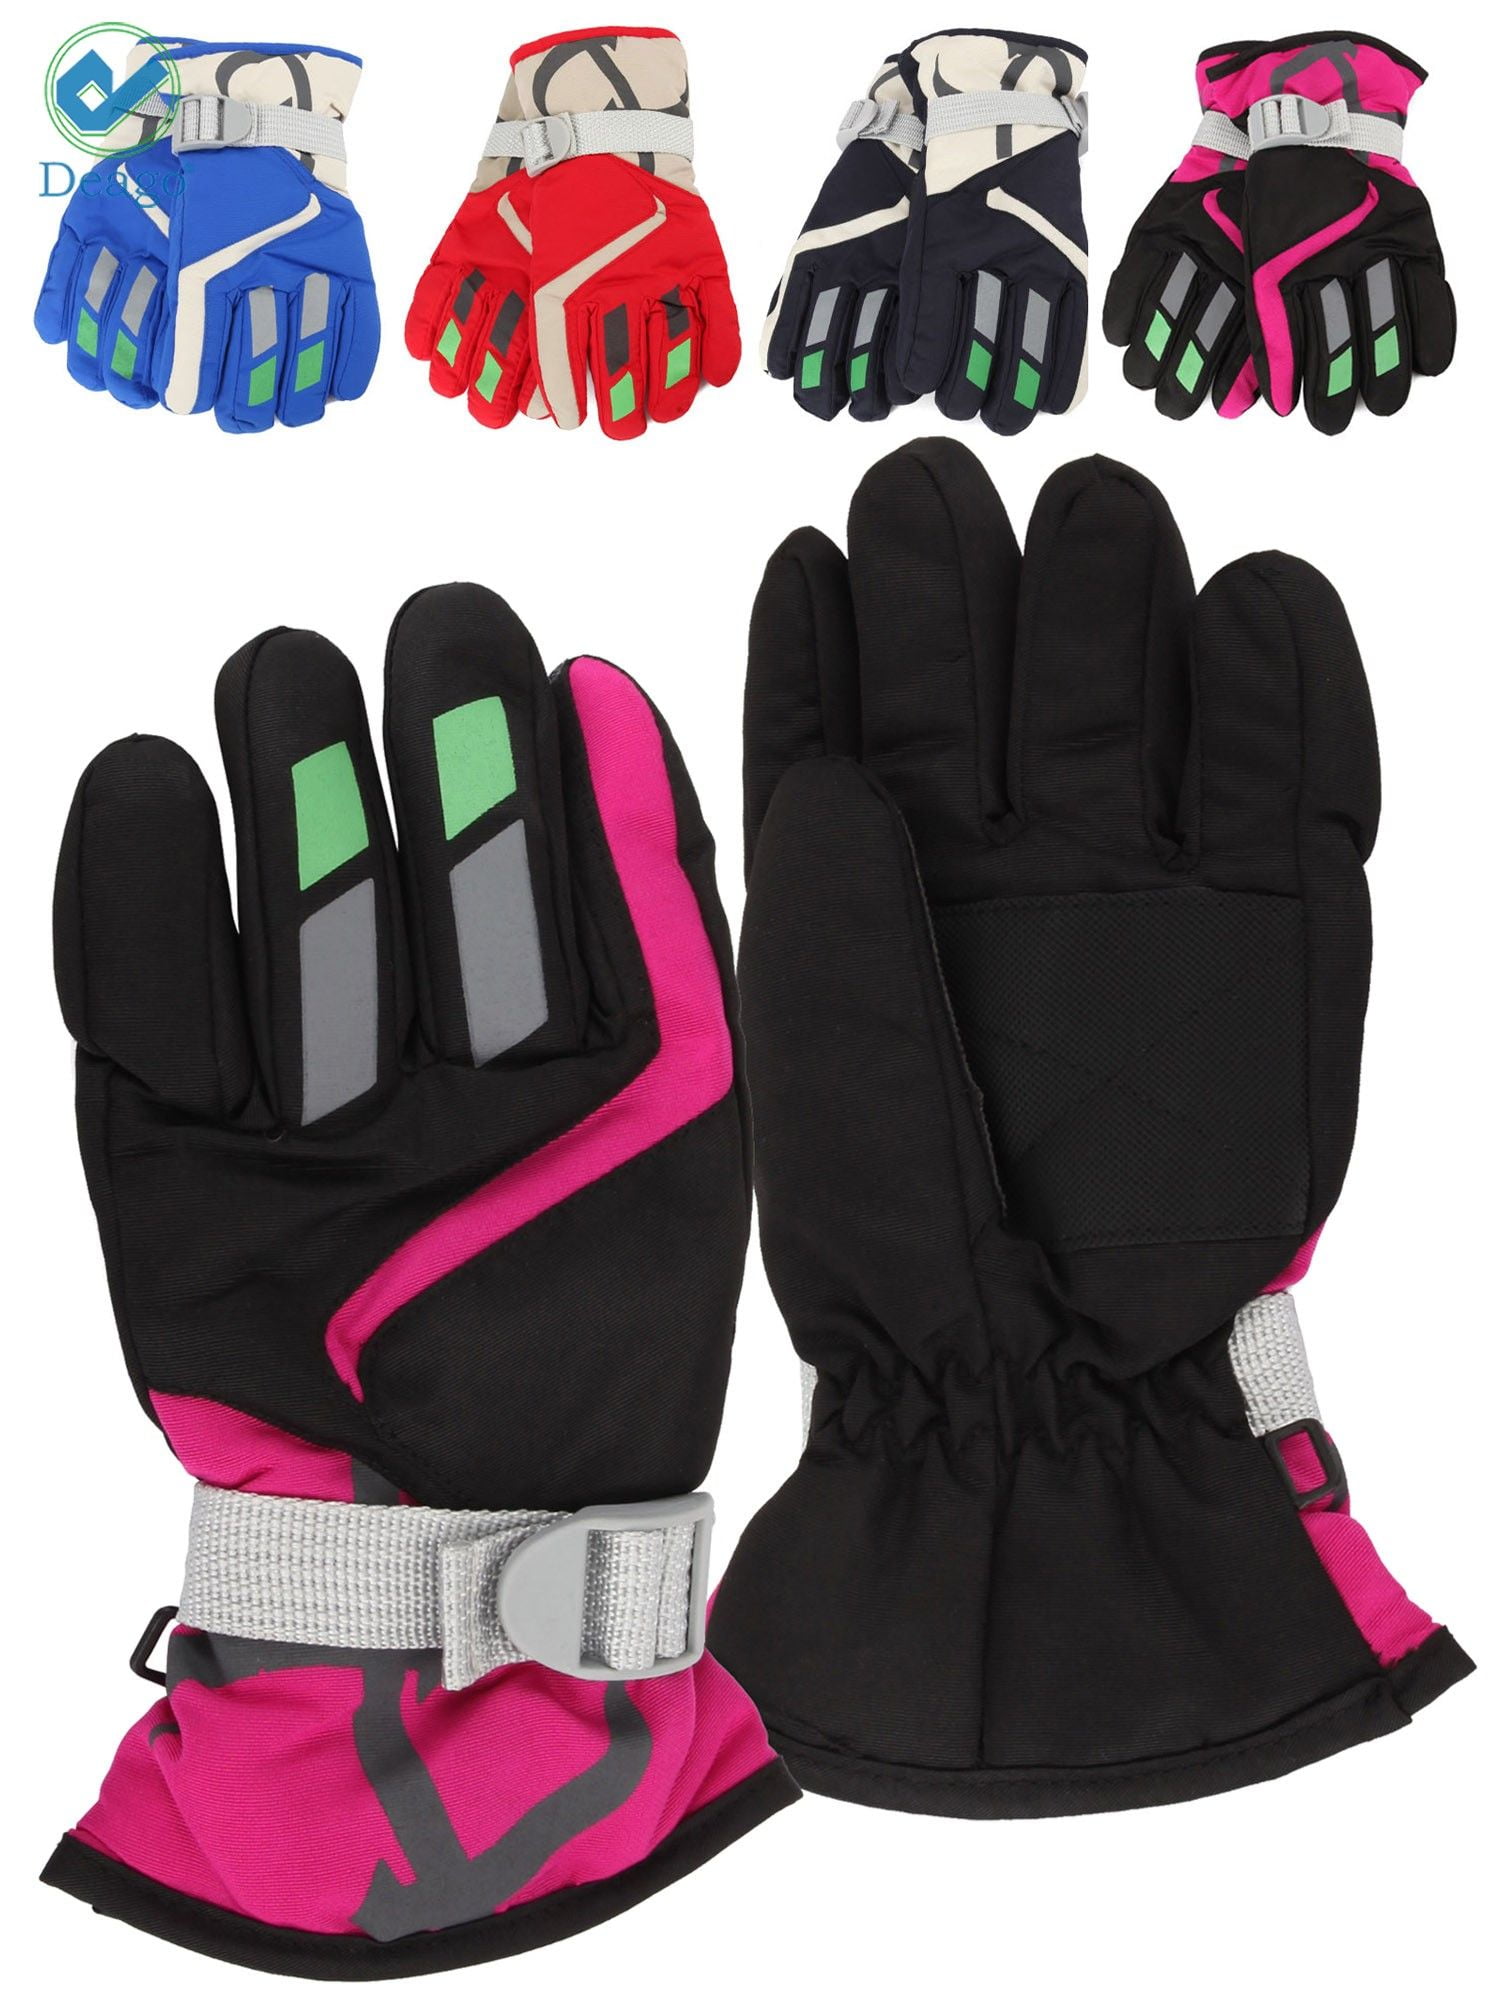 Kids Winter Gloves Snow & Ski Waterproof Thermal Insulated Gloves for Boys Girls Toddler Children & Youth for Cold Weather